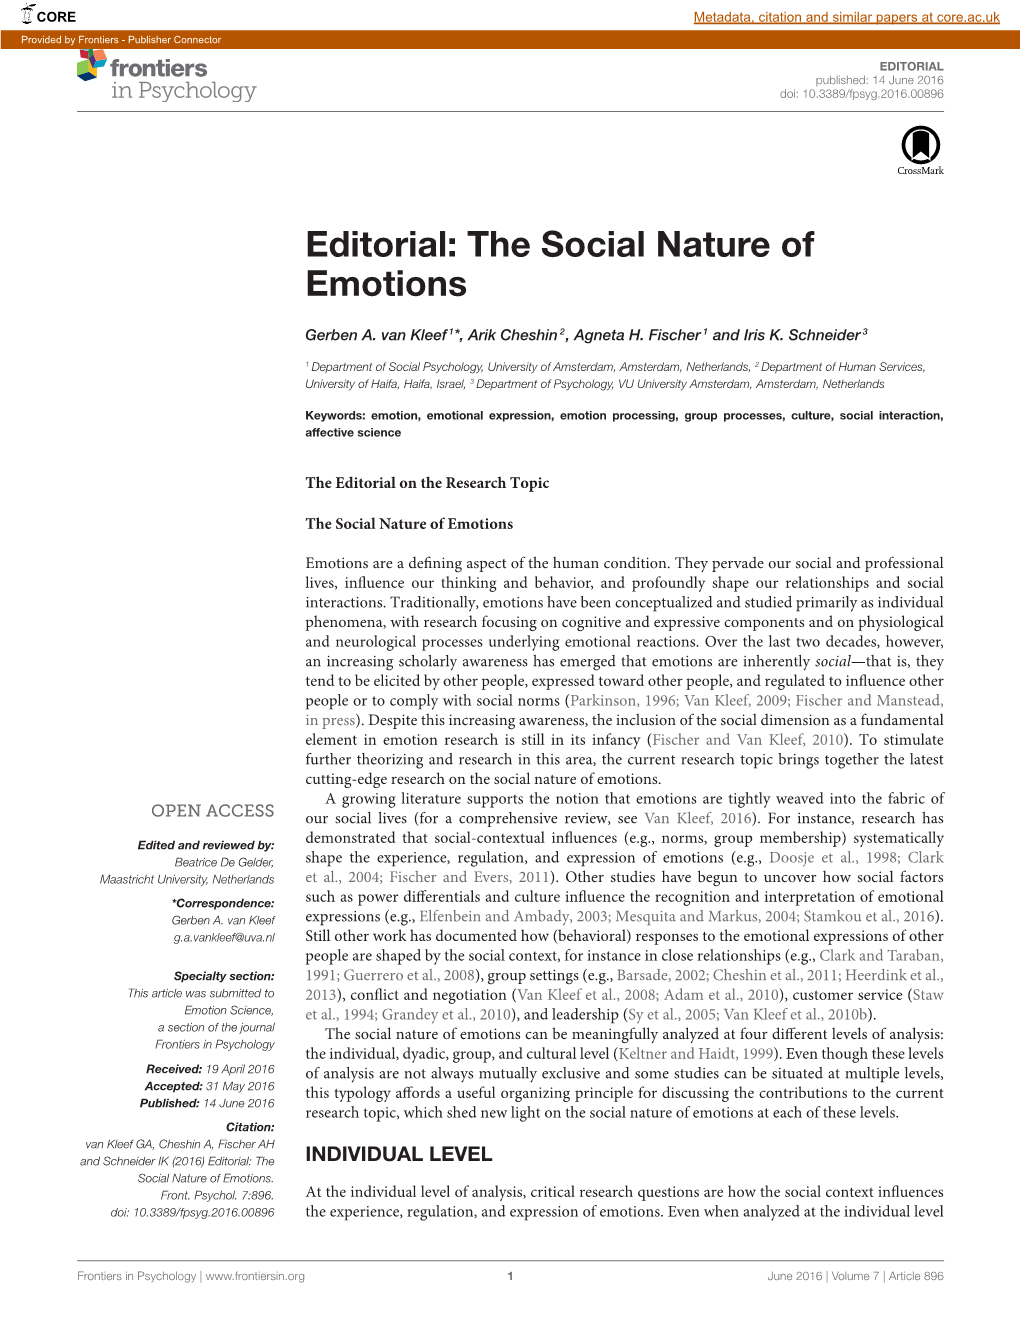 The Social Nature of Emotions